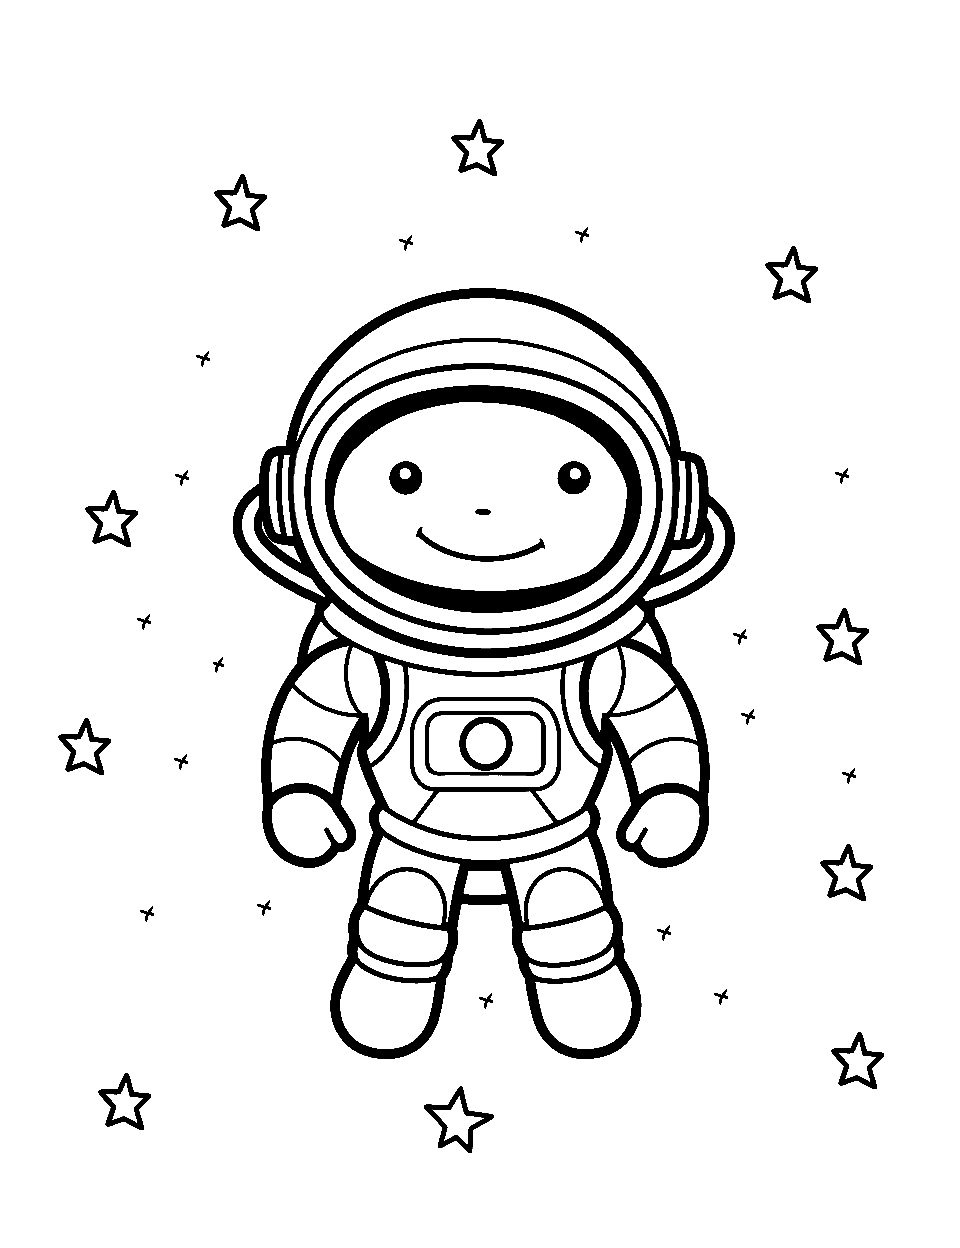 Easy-to-Color Astronaut Coloring Page - A basic astronaut figure with simple equipment.